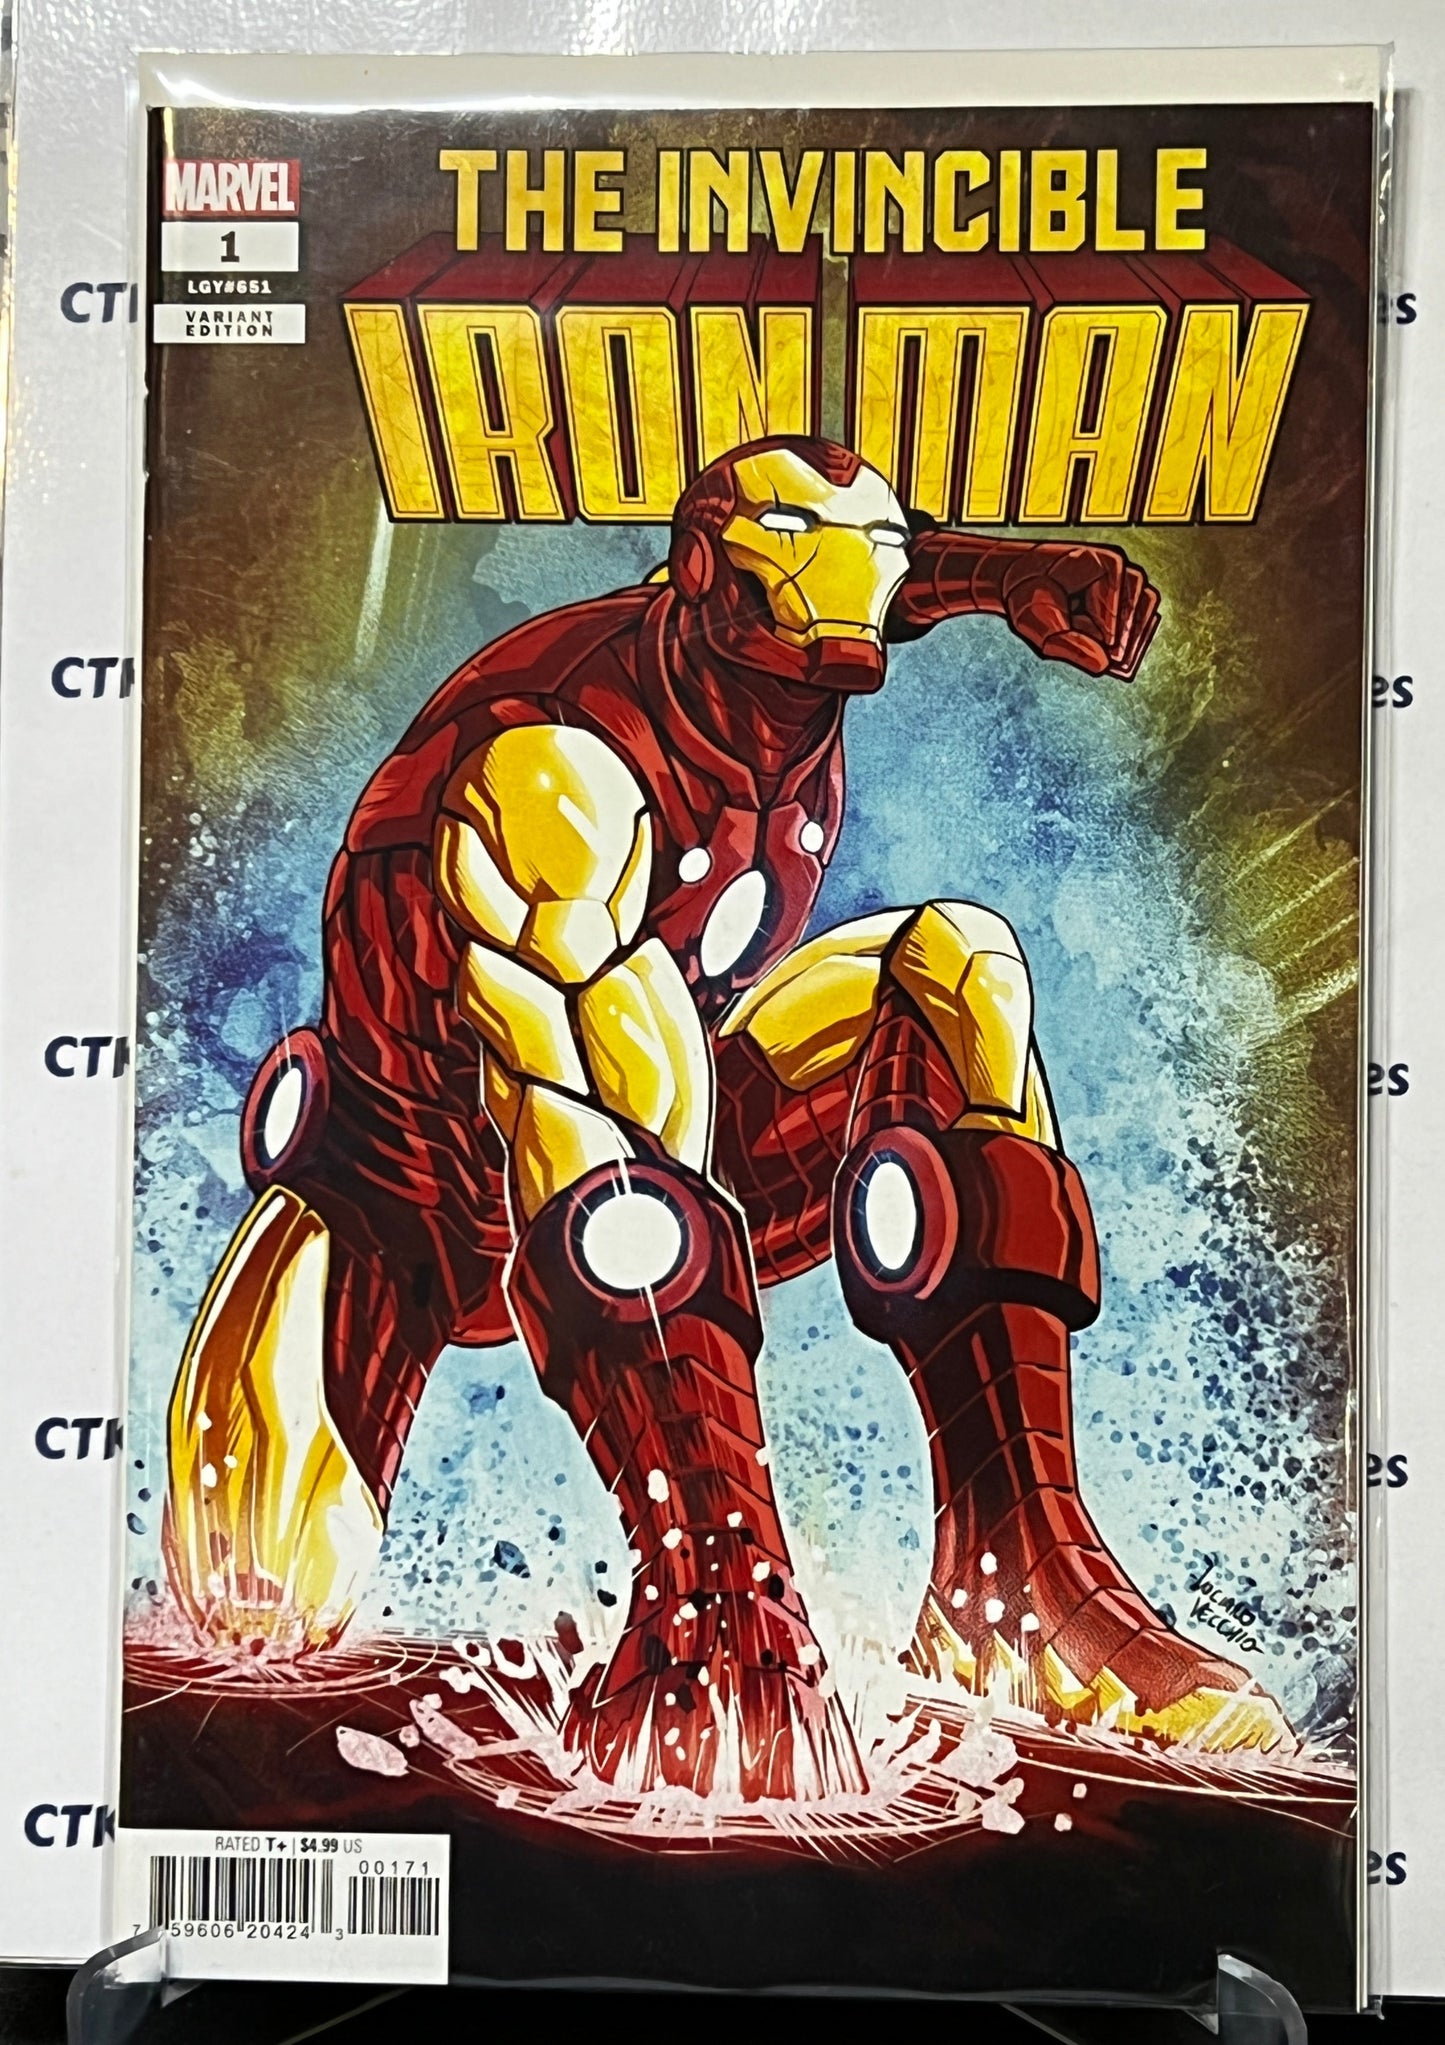 THE INVINCIBLE IRON MAN # 1 VARIANT COVER NM MARVEL 2023